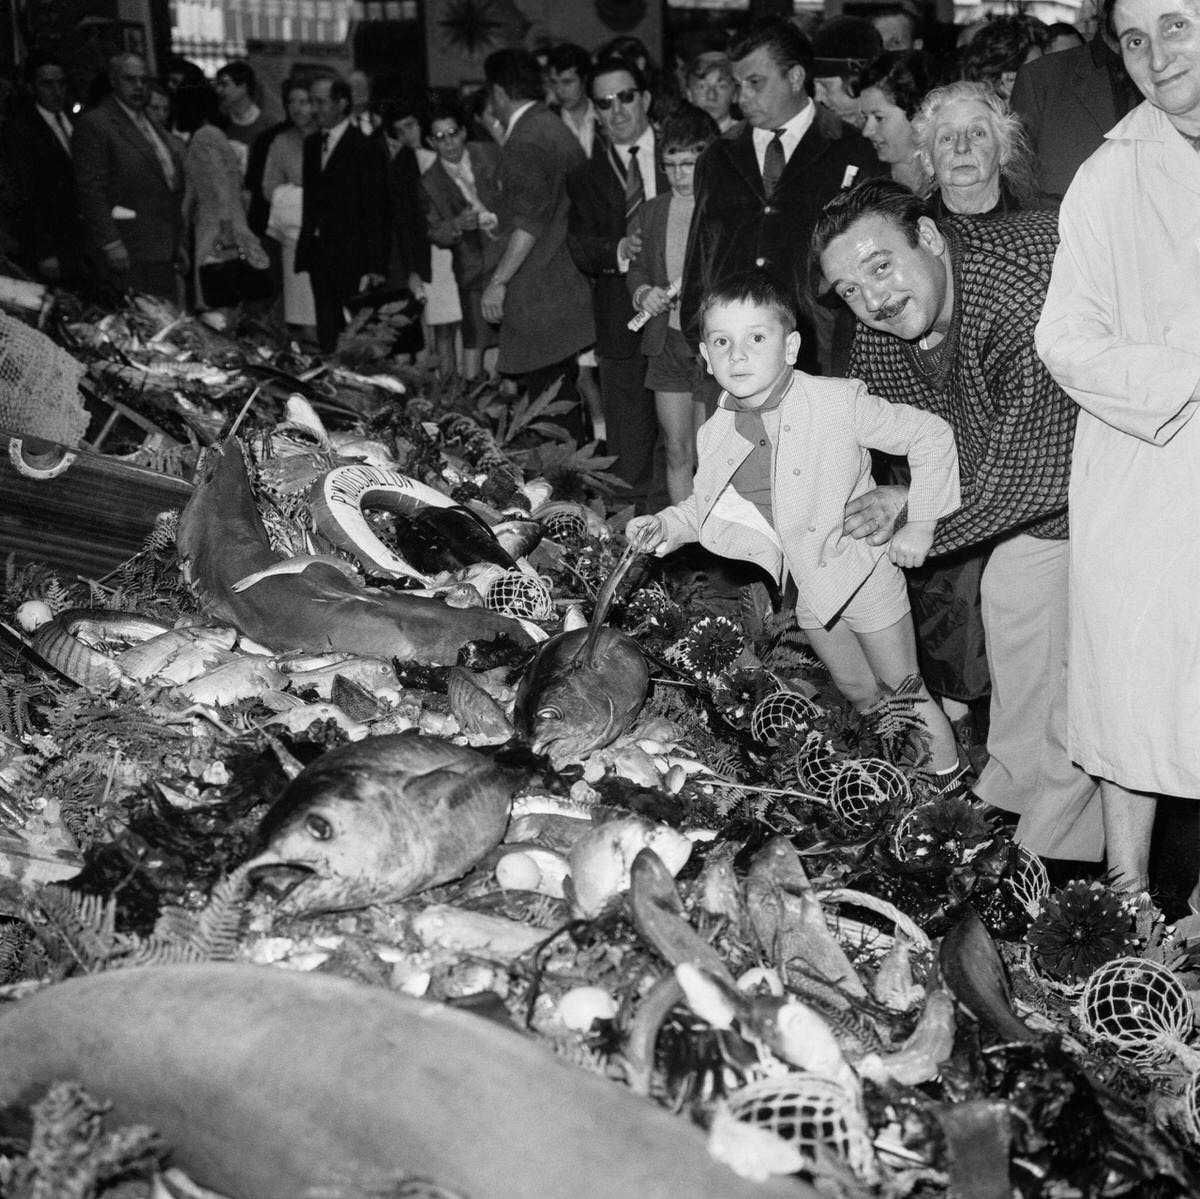 The crowd admires the largest buffet in the world where fish of all kinds are artistically presented for the great fish fair, in Paris, 1967